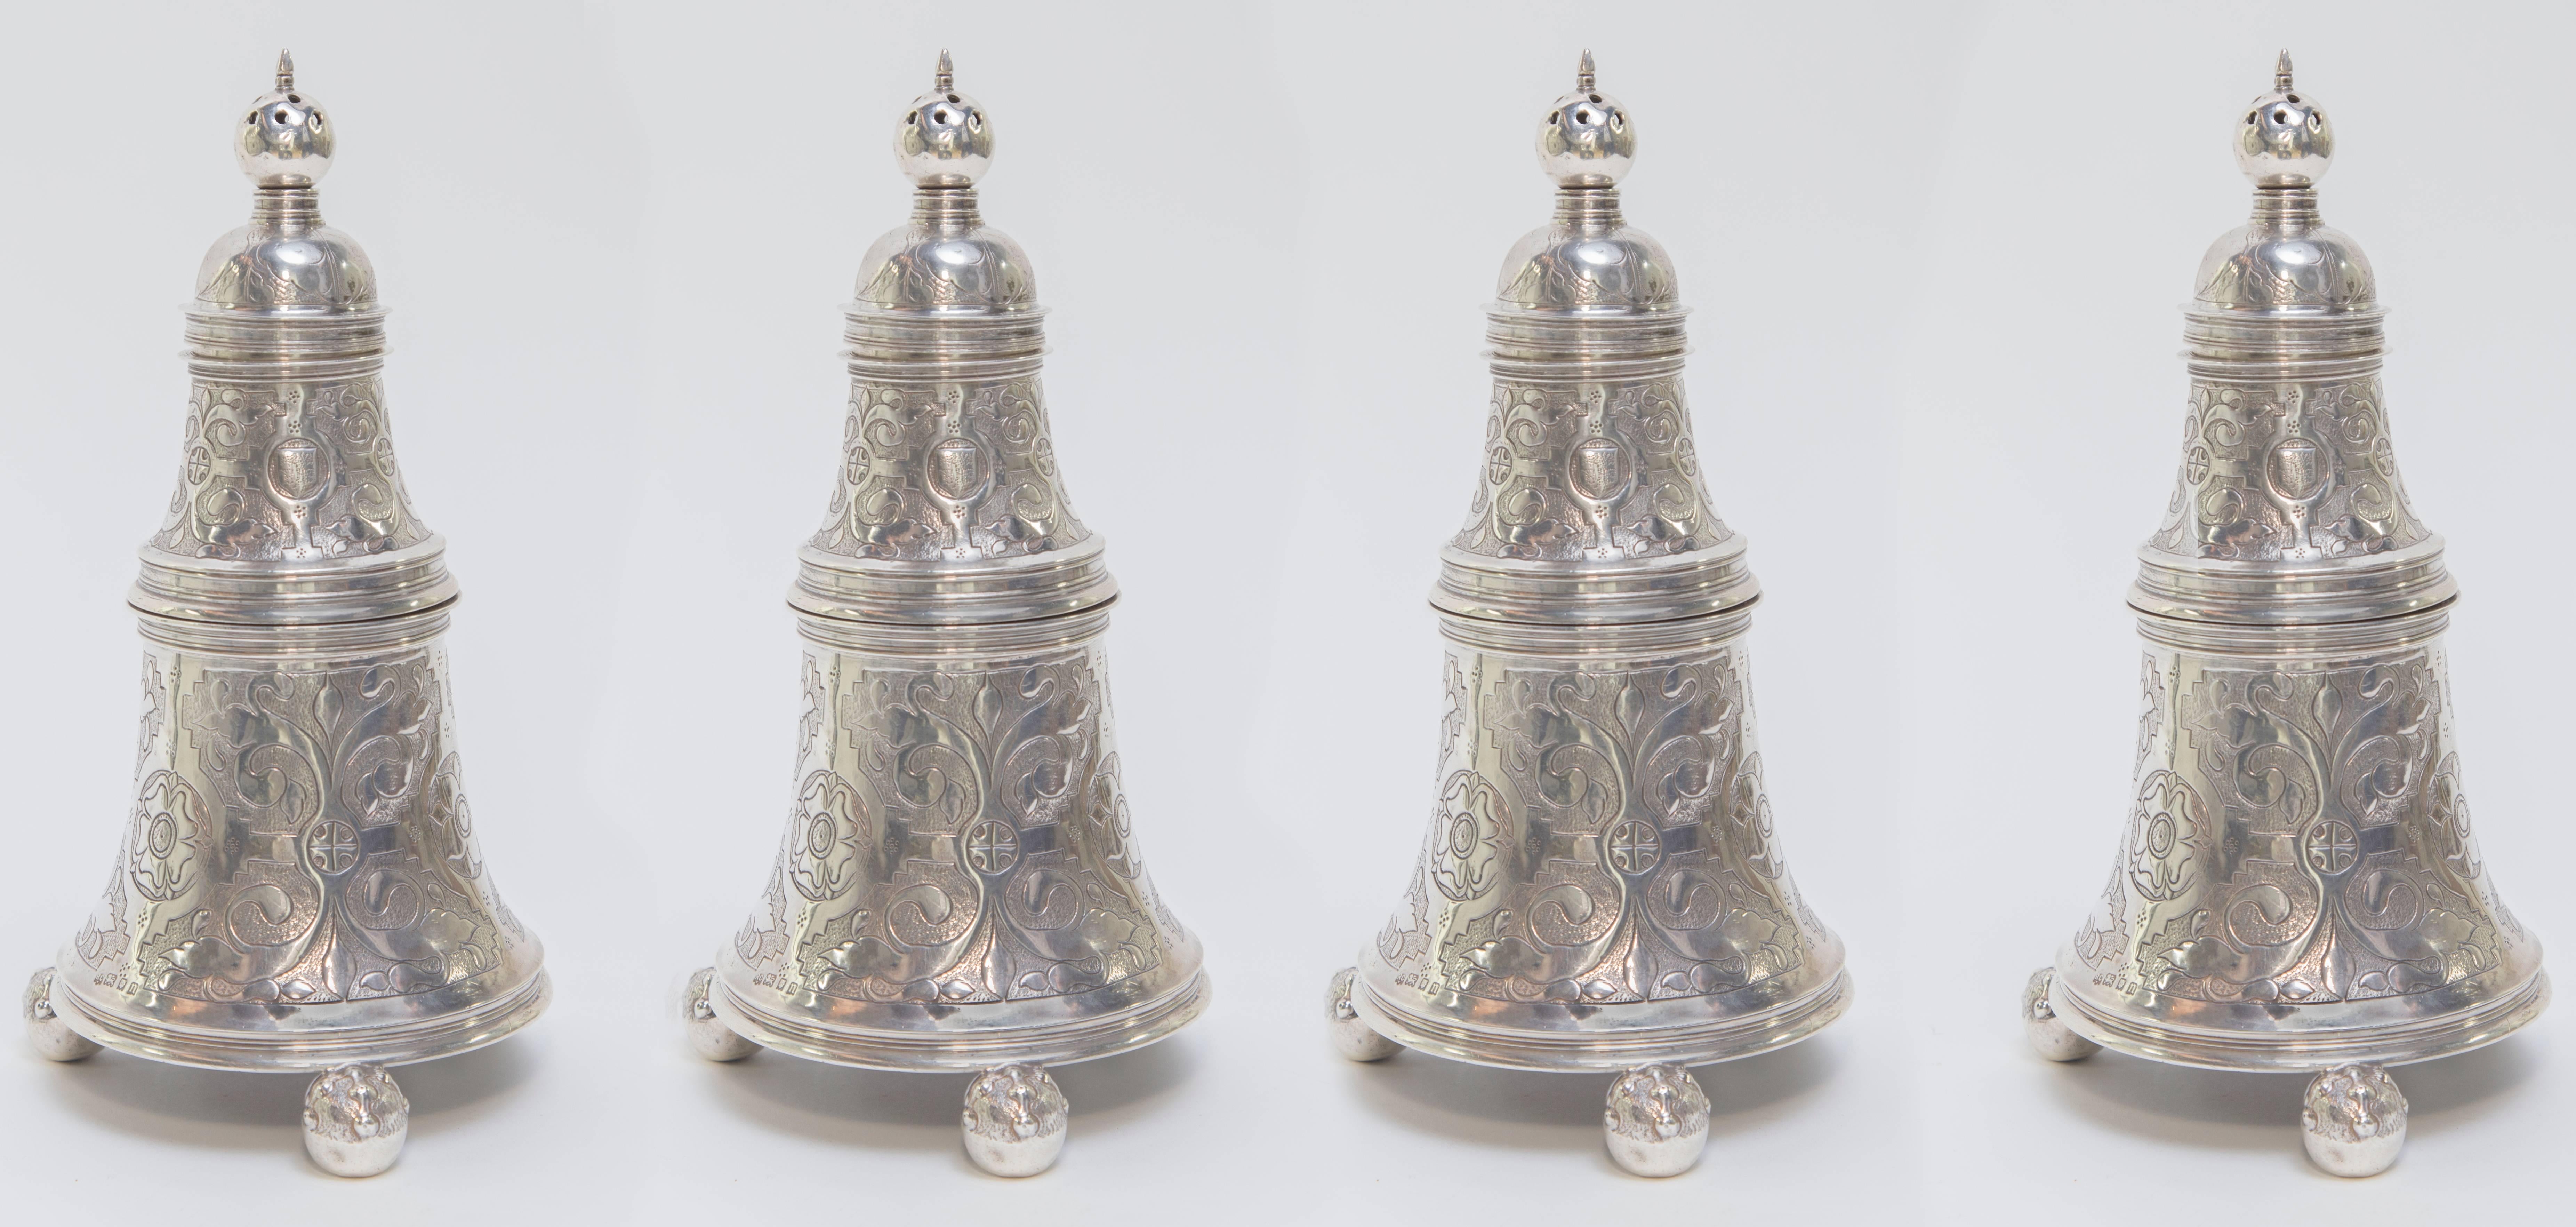 Each set of four bell salt is comprised of two containers and a pepper shaker. The decoration is in reserve on a ring-punched ground, and consists of leaves of several types set in roundels or lozenges or elsewhere just set into the ring-punched